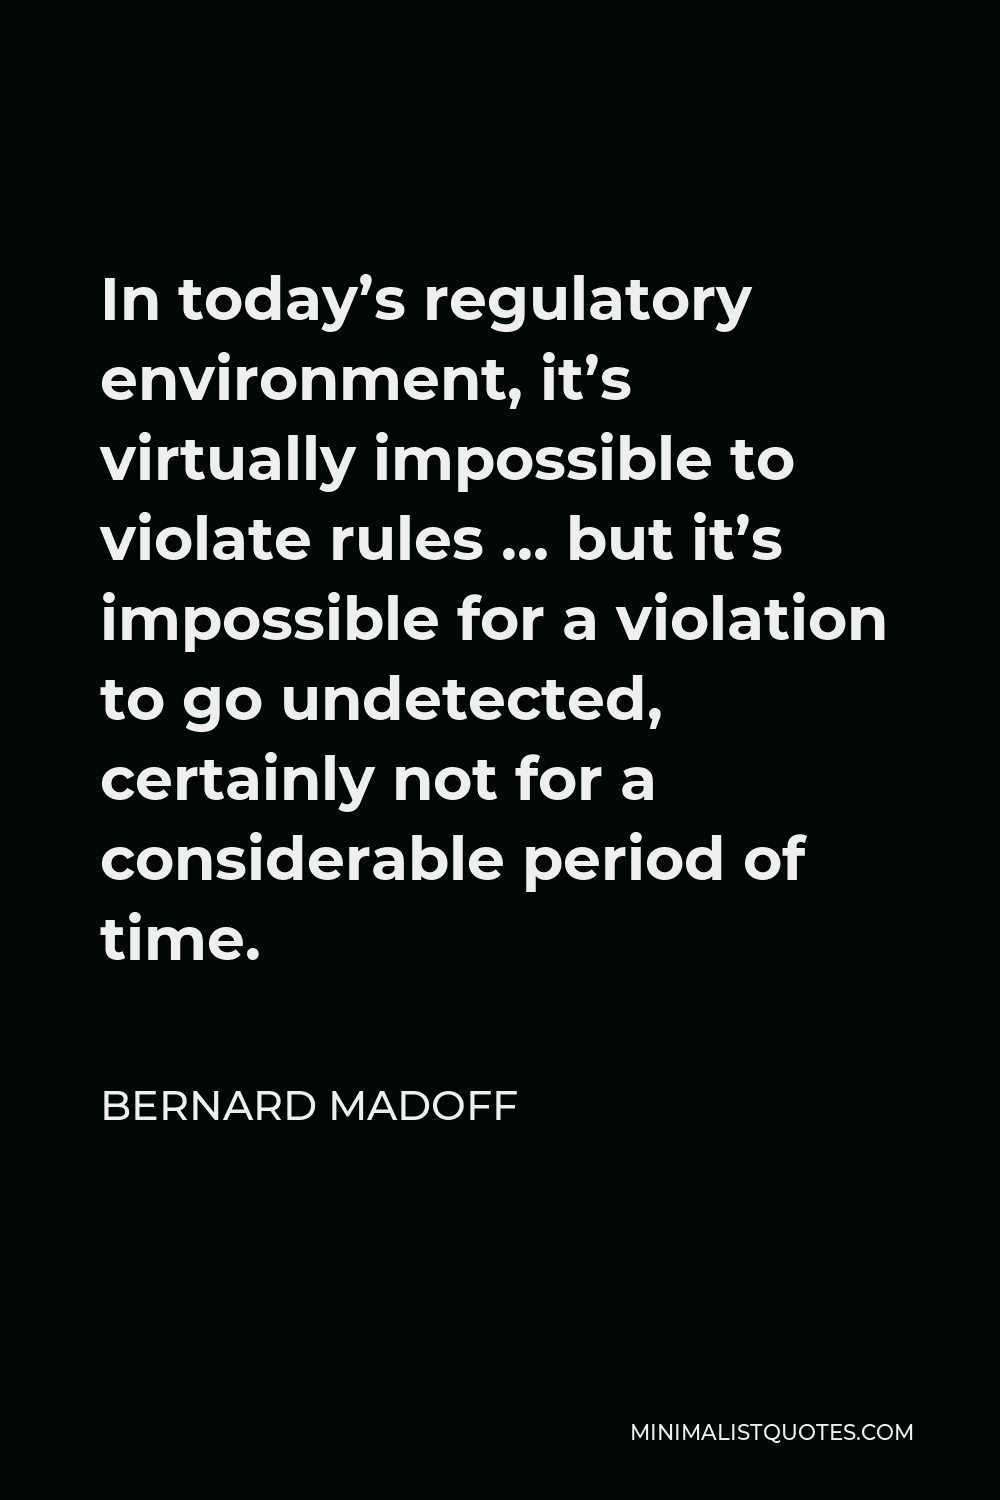 Bernard Madoff Quote - In today’s regulatory environment, it’s virtually impossible to violate rules … but it’s impossible for a violation to go undetected, certainly not for a considerable period of time.